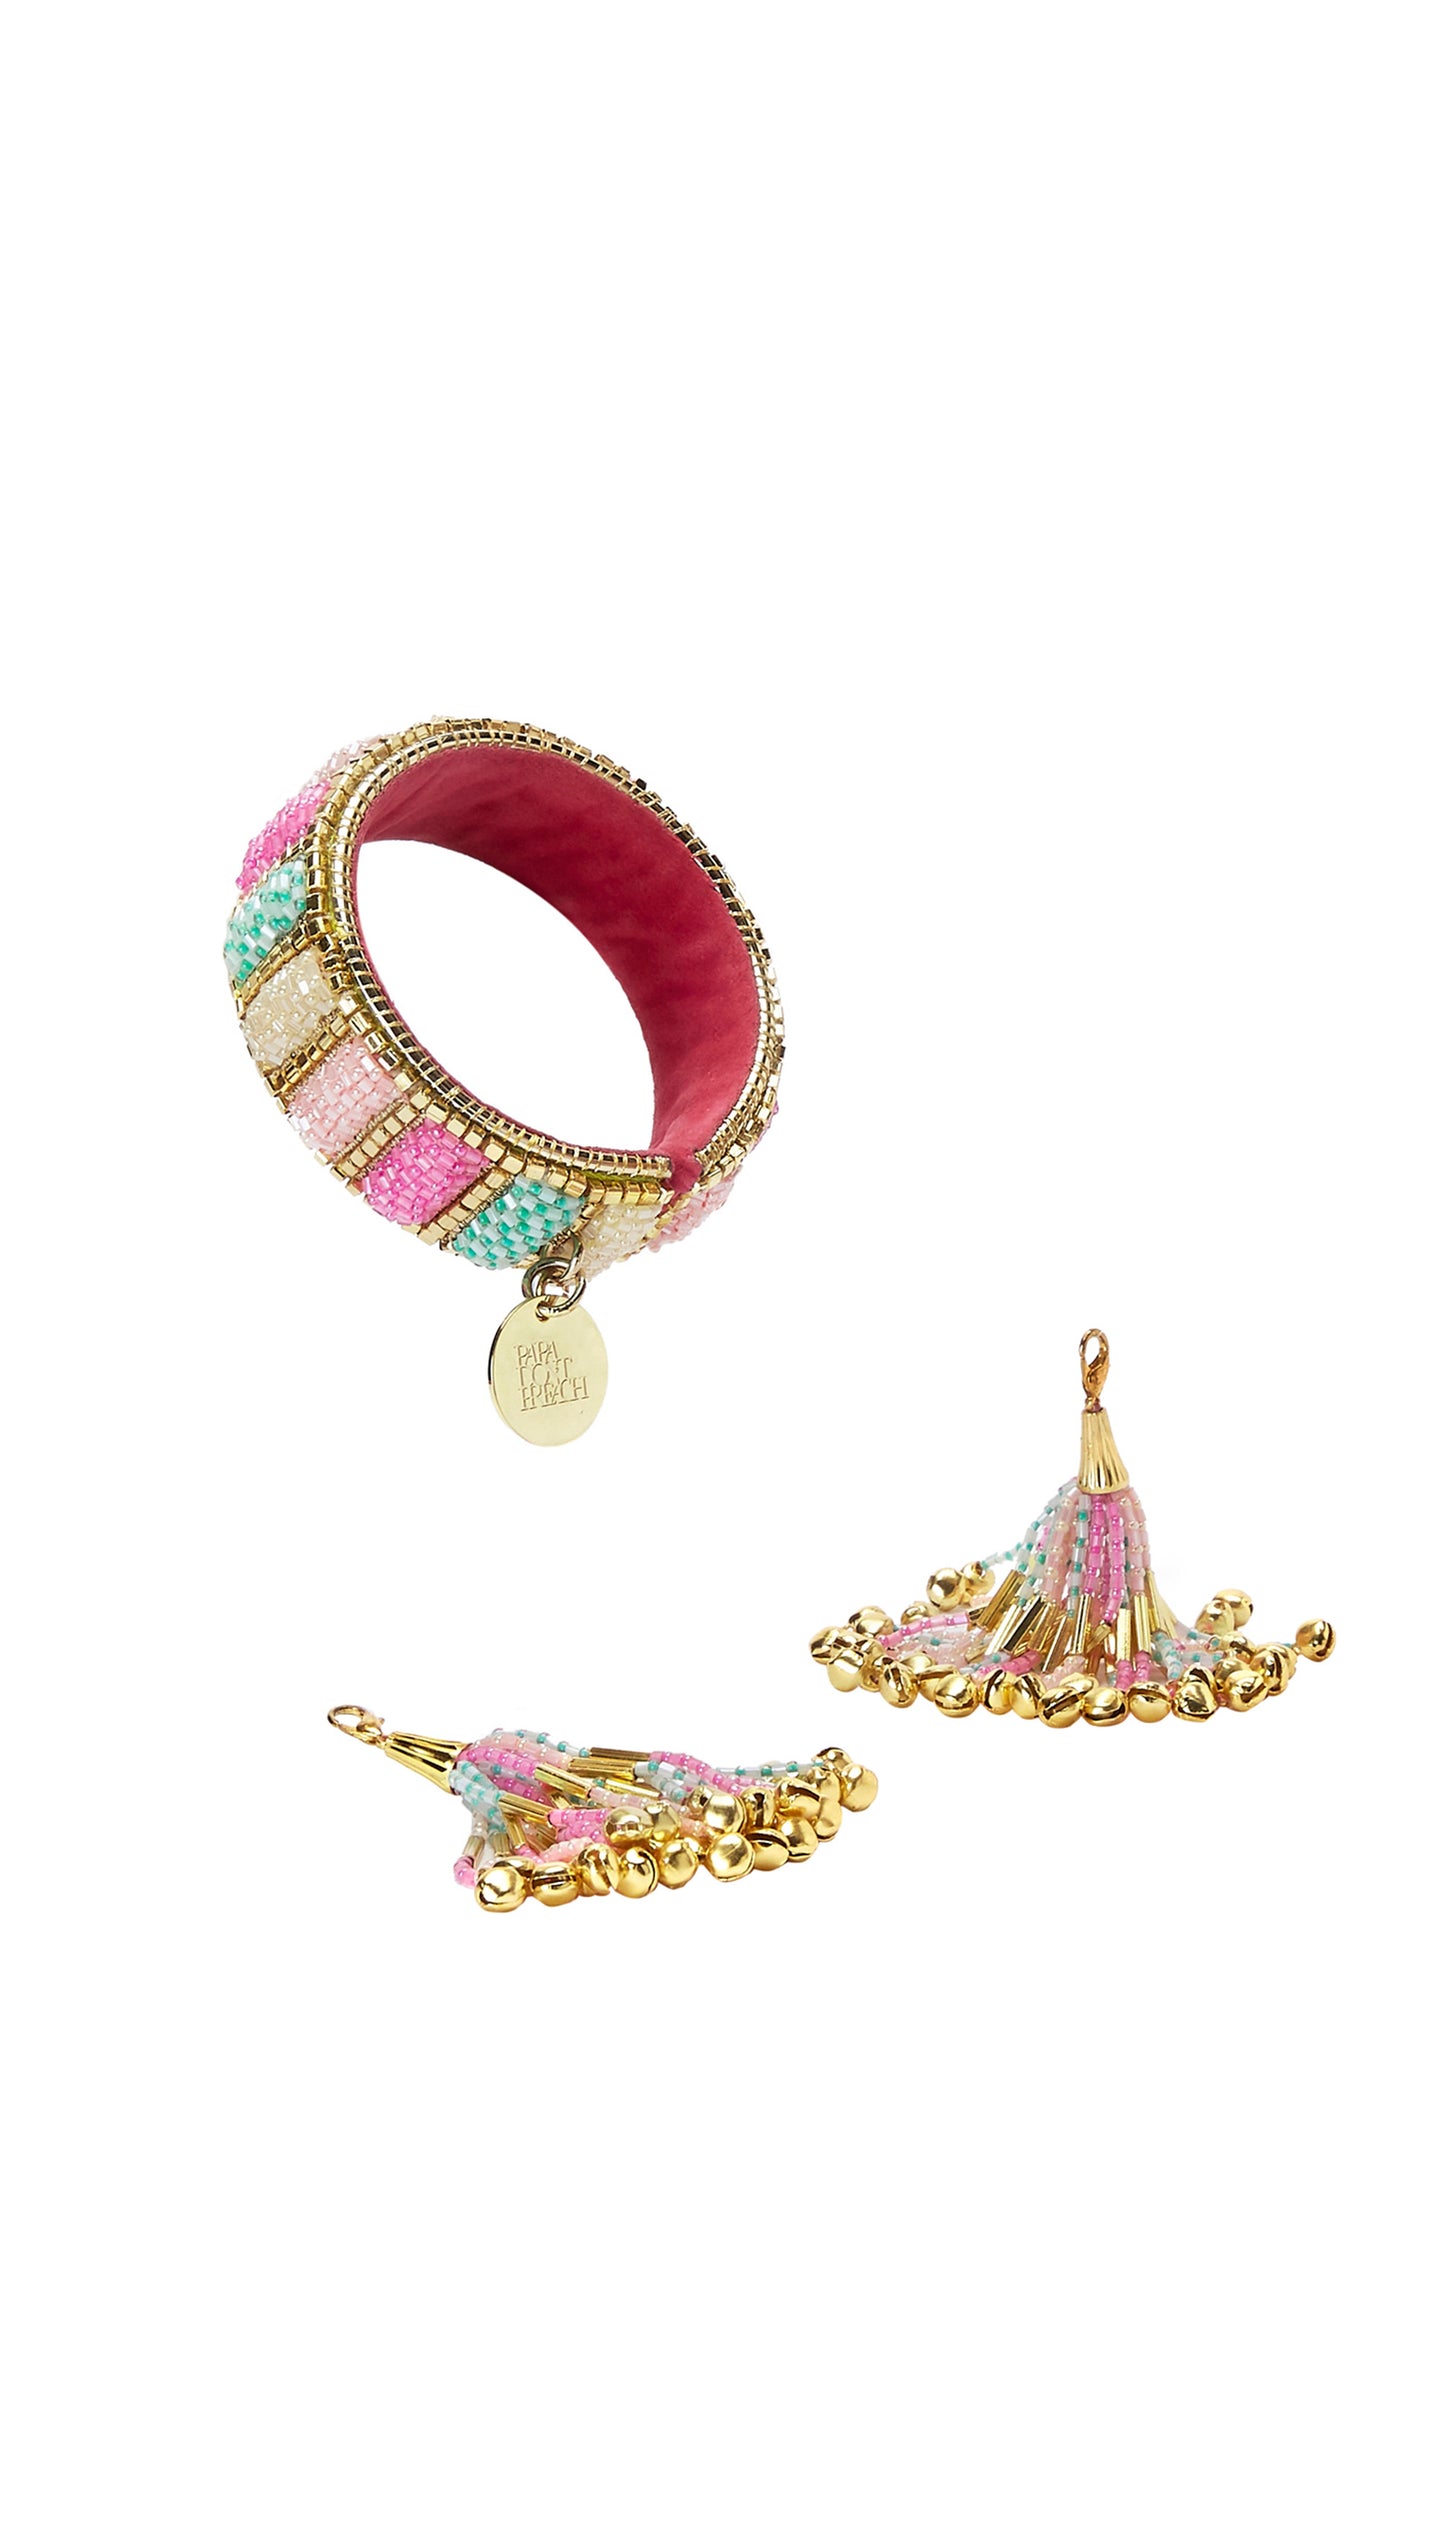 EYE CANDY : YELLOW - EMBROIDERED TASSEL BANGLE